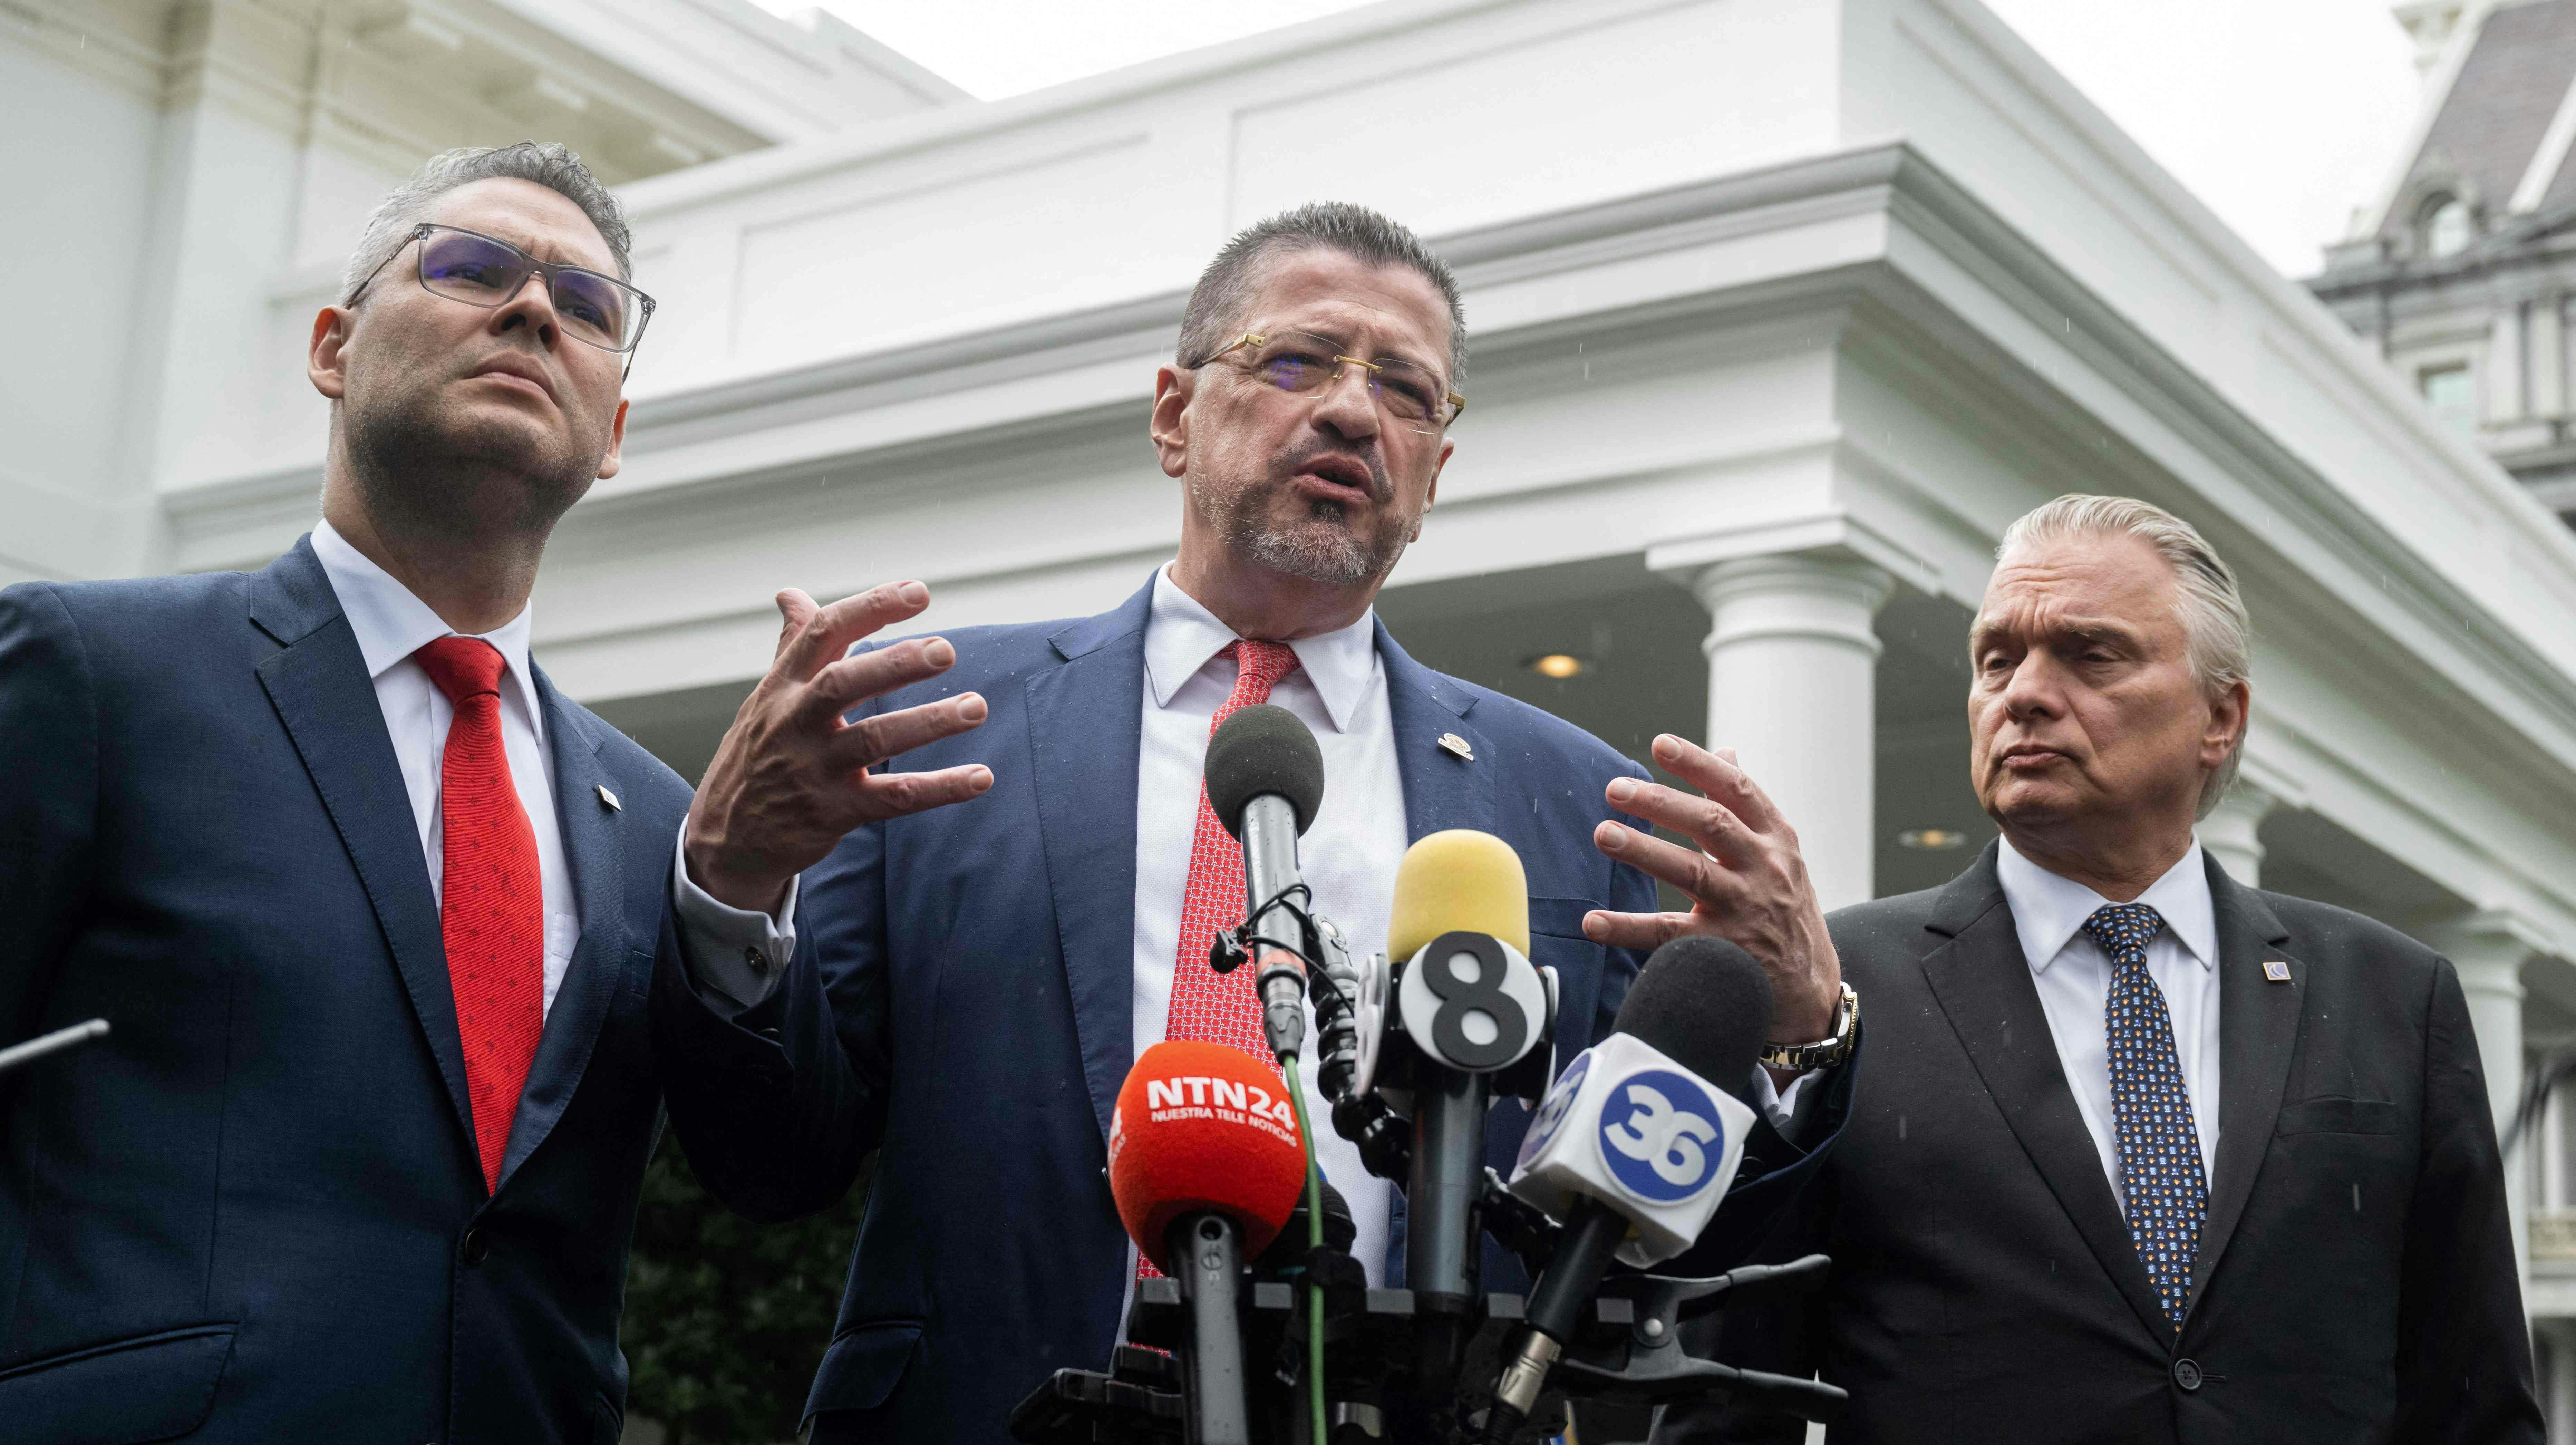 President Rodrigo Chaves Robles (C) of Costa Rica speaks to the media outside the West Wing after meeting with US President Joe Biden at the White House in Washington, DC, August 29, 2023. (Photo by SAUL LOEB / AFP)